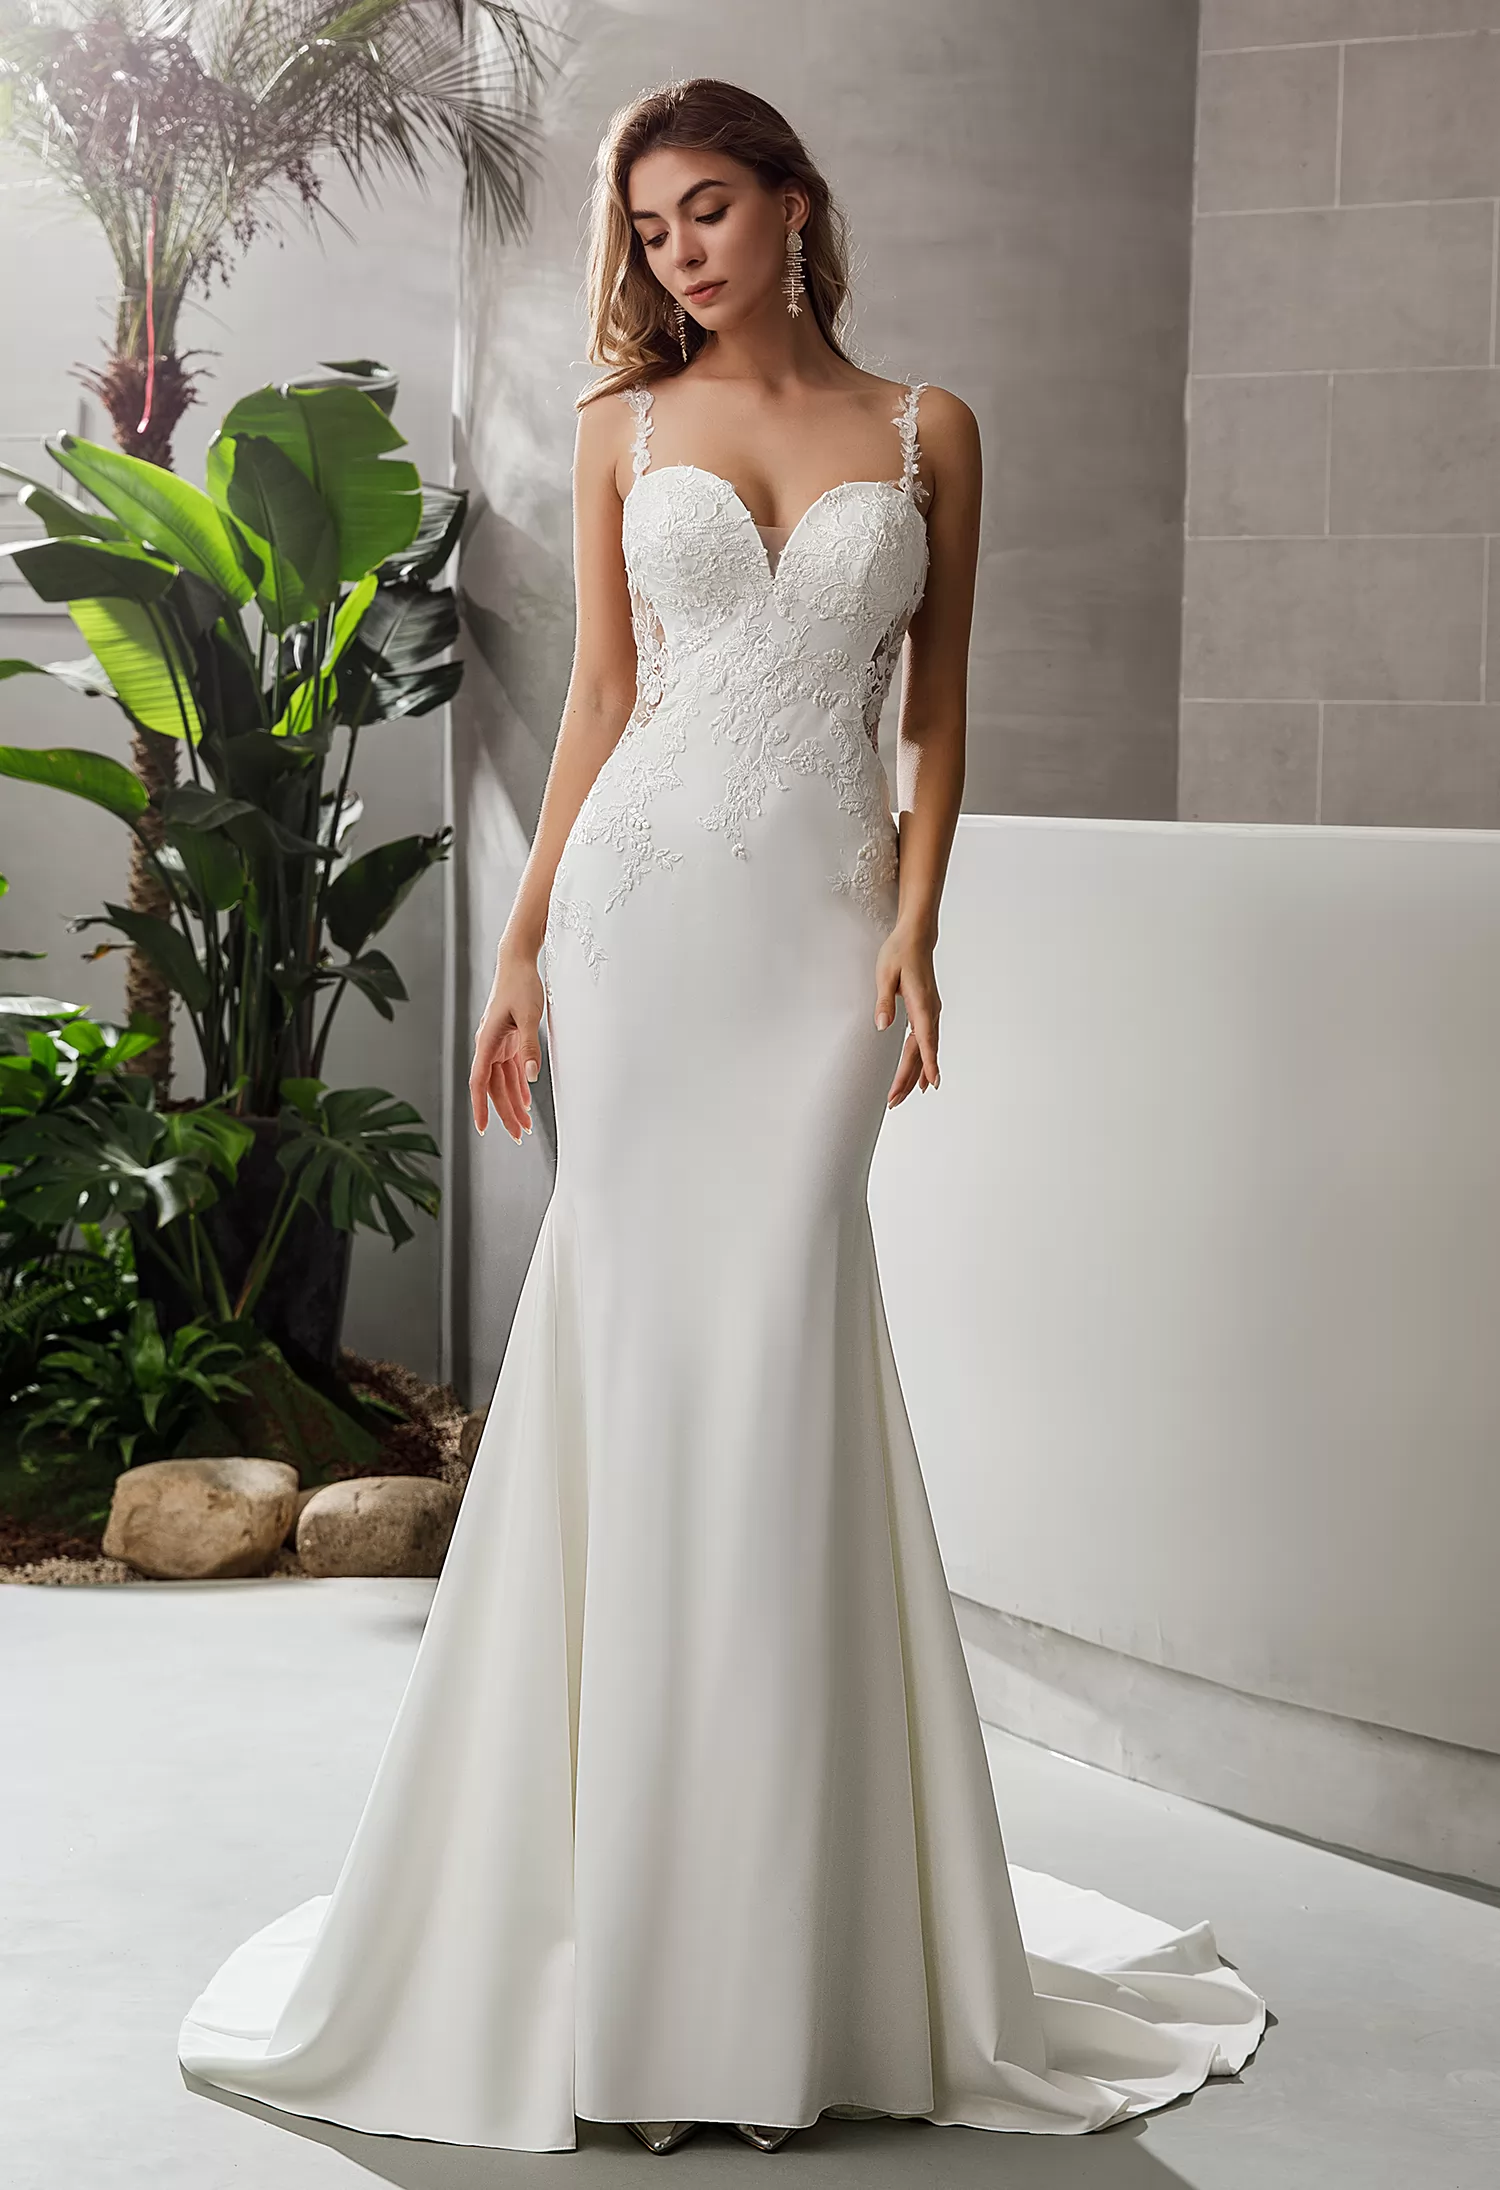 Crepe Fit and Flare Crepe Silhouette Lace Straps Wedding Dress